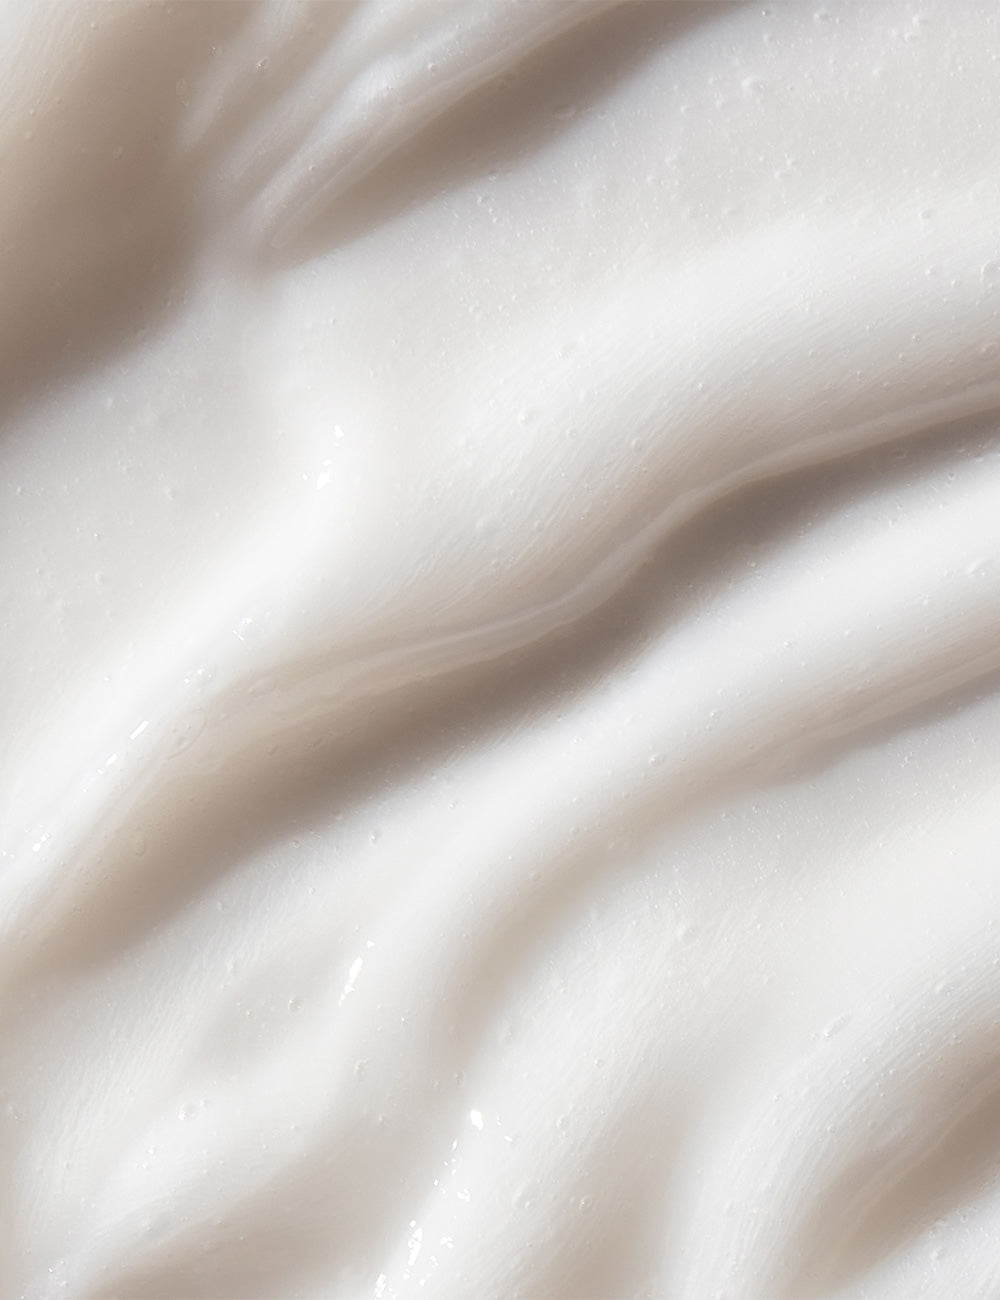 Close-up photo of the creamy and white texture of body wash with small bubbles, on a plain background.